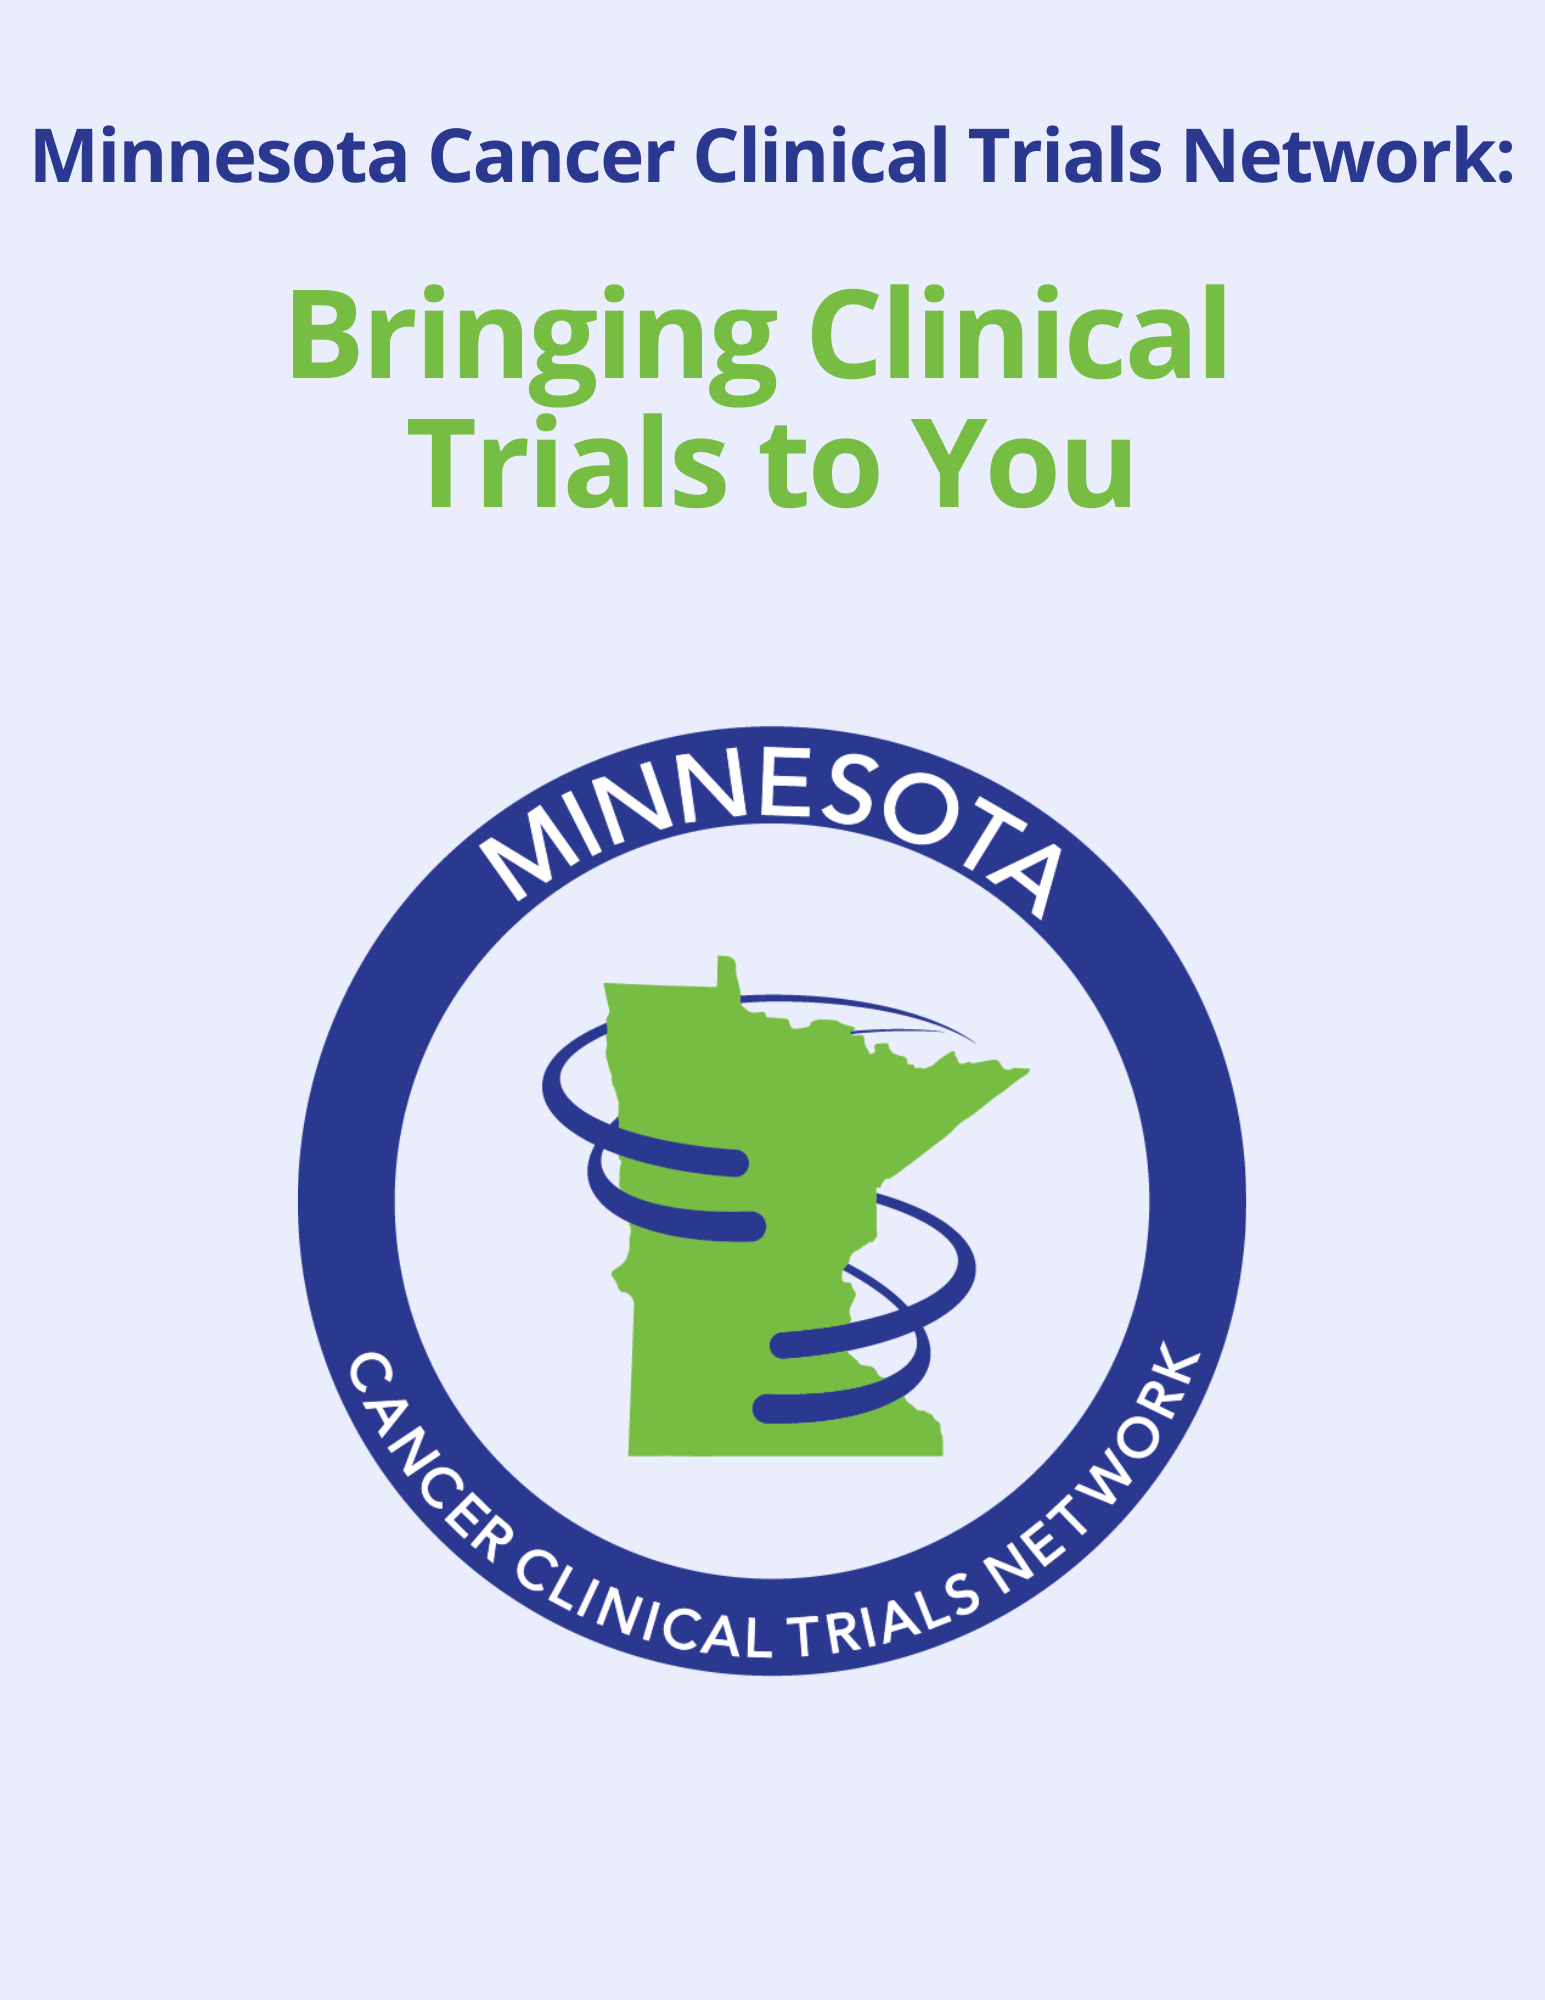 MNCCTN bringing clinical trials to you